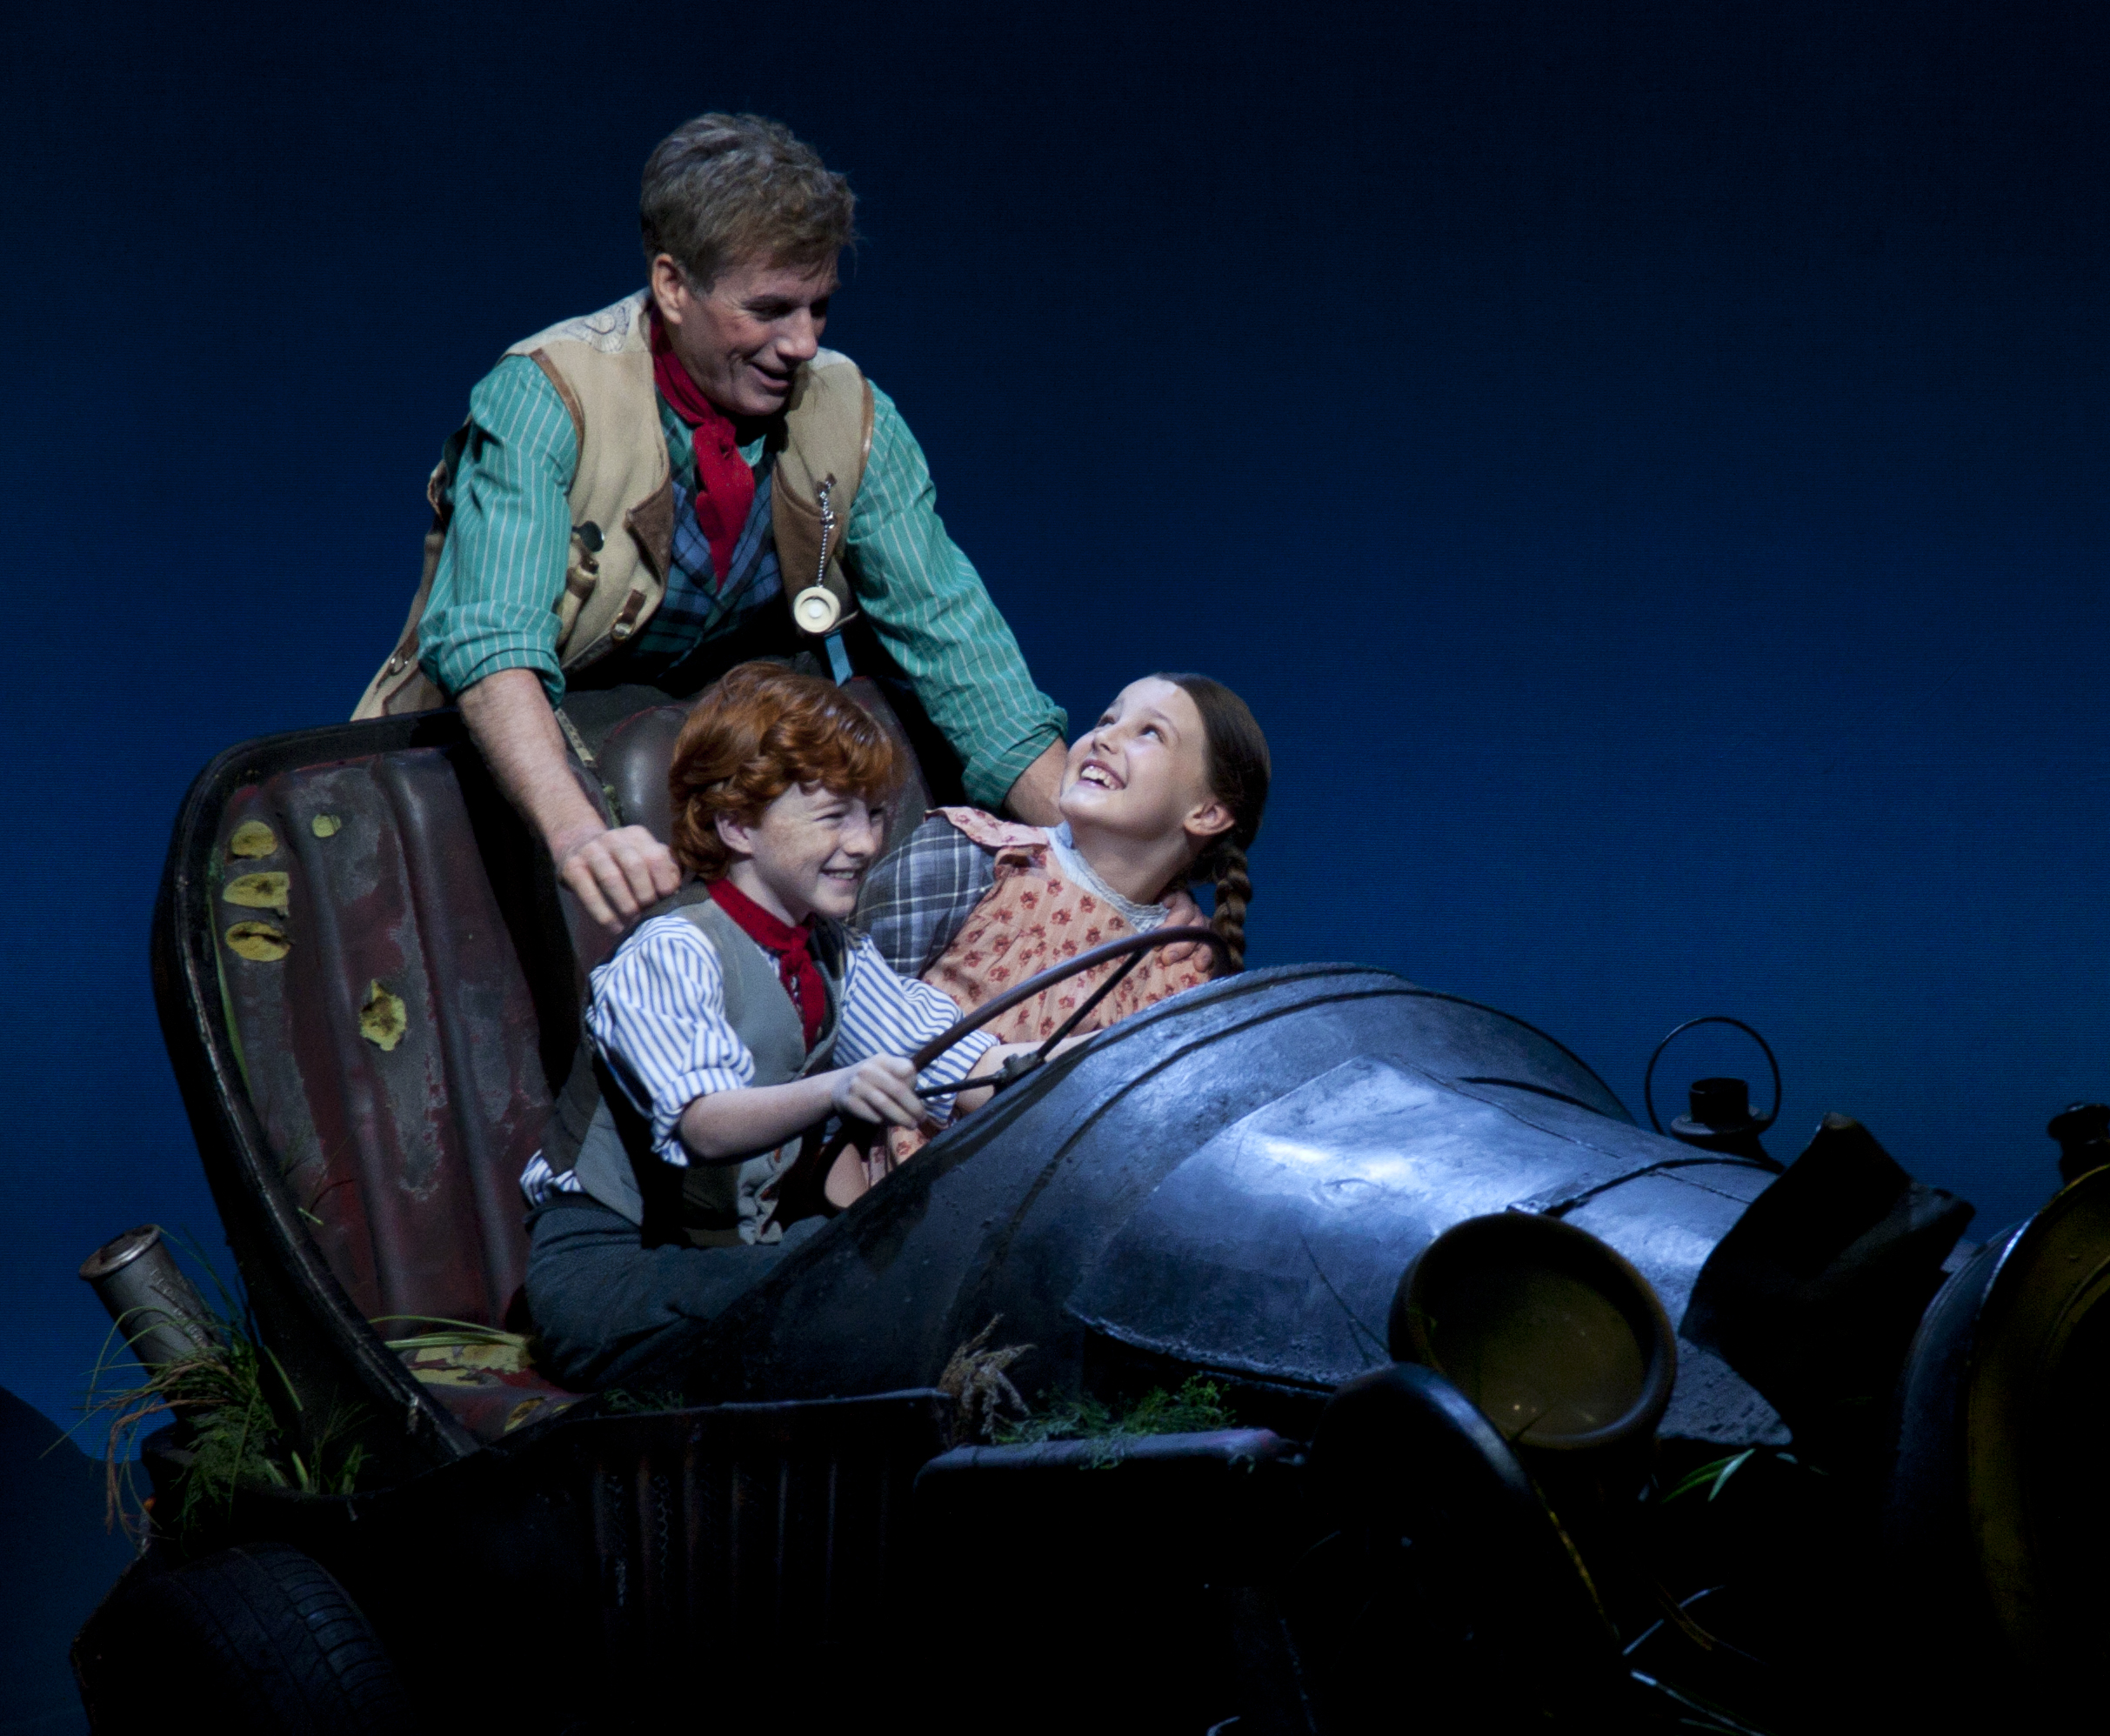 Sophie as the lead role of Jemima in Chitty Chitty Bang Bang at QPAC 2013.